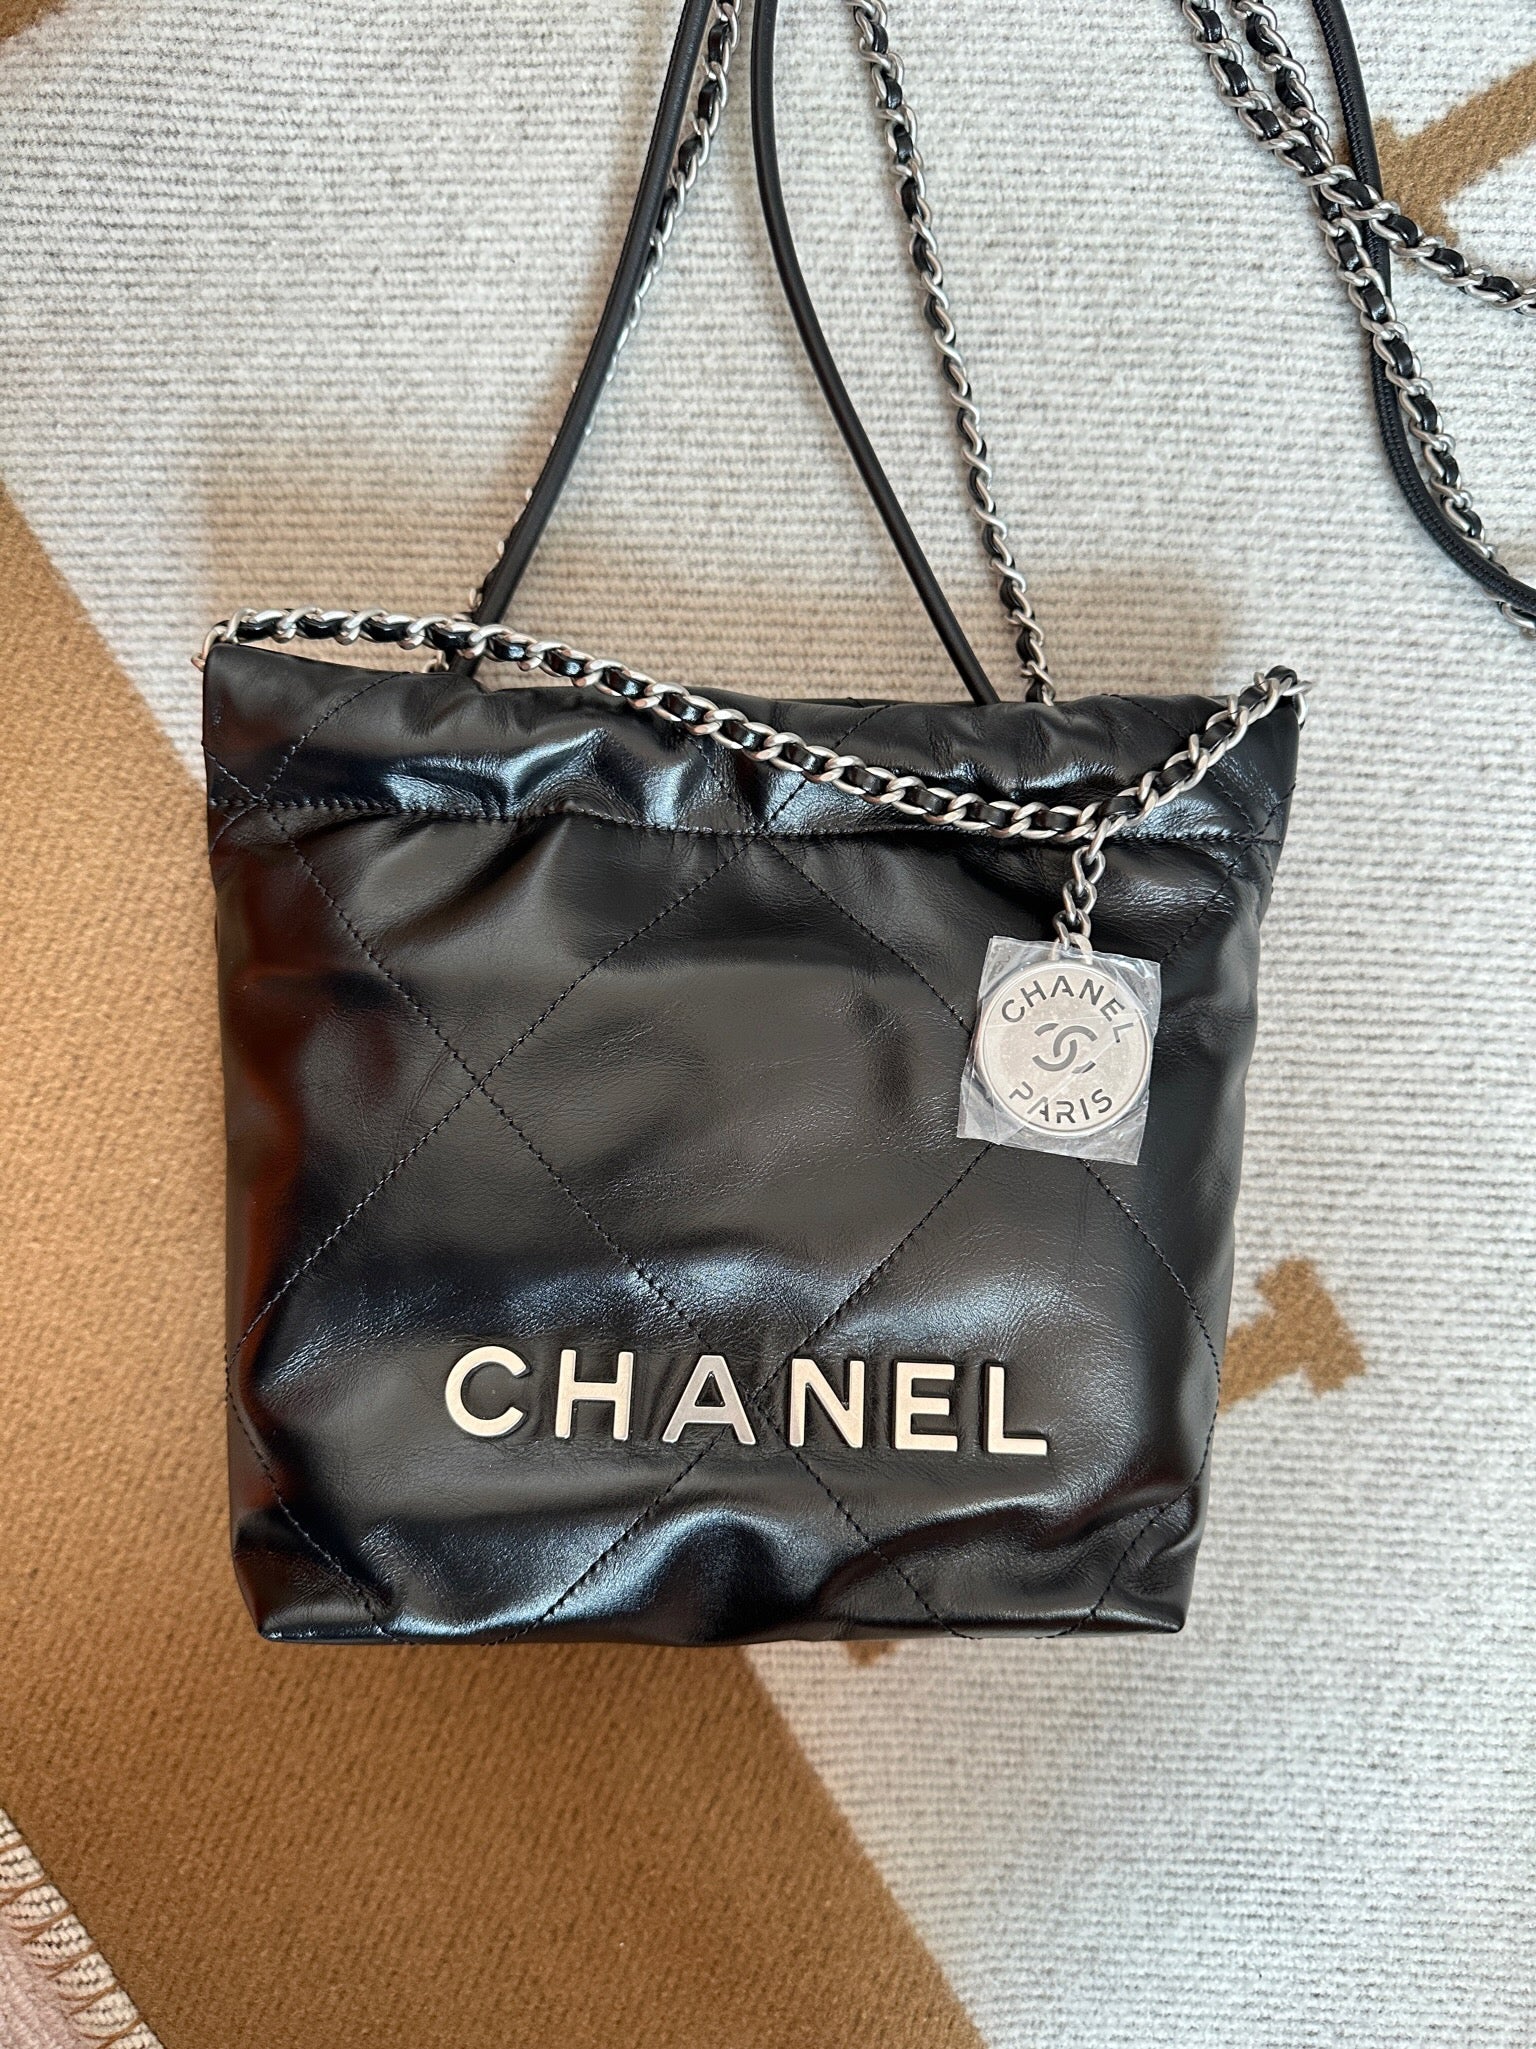 chanel bag with silver hardware